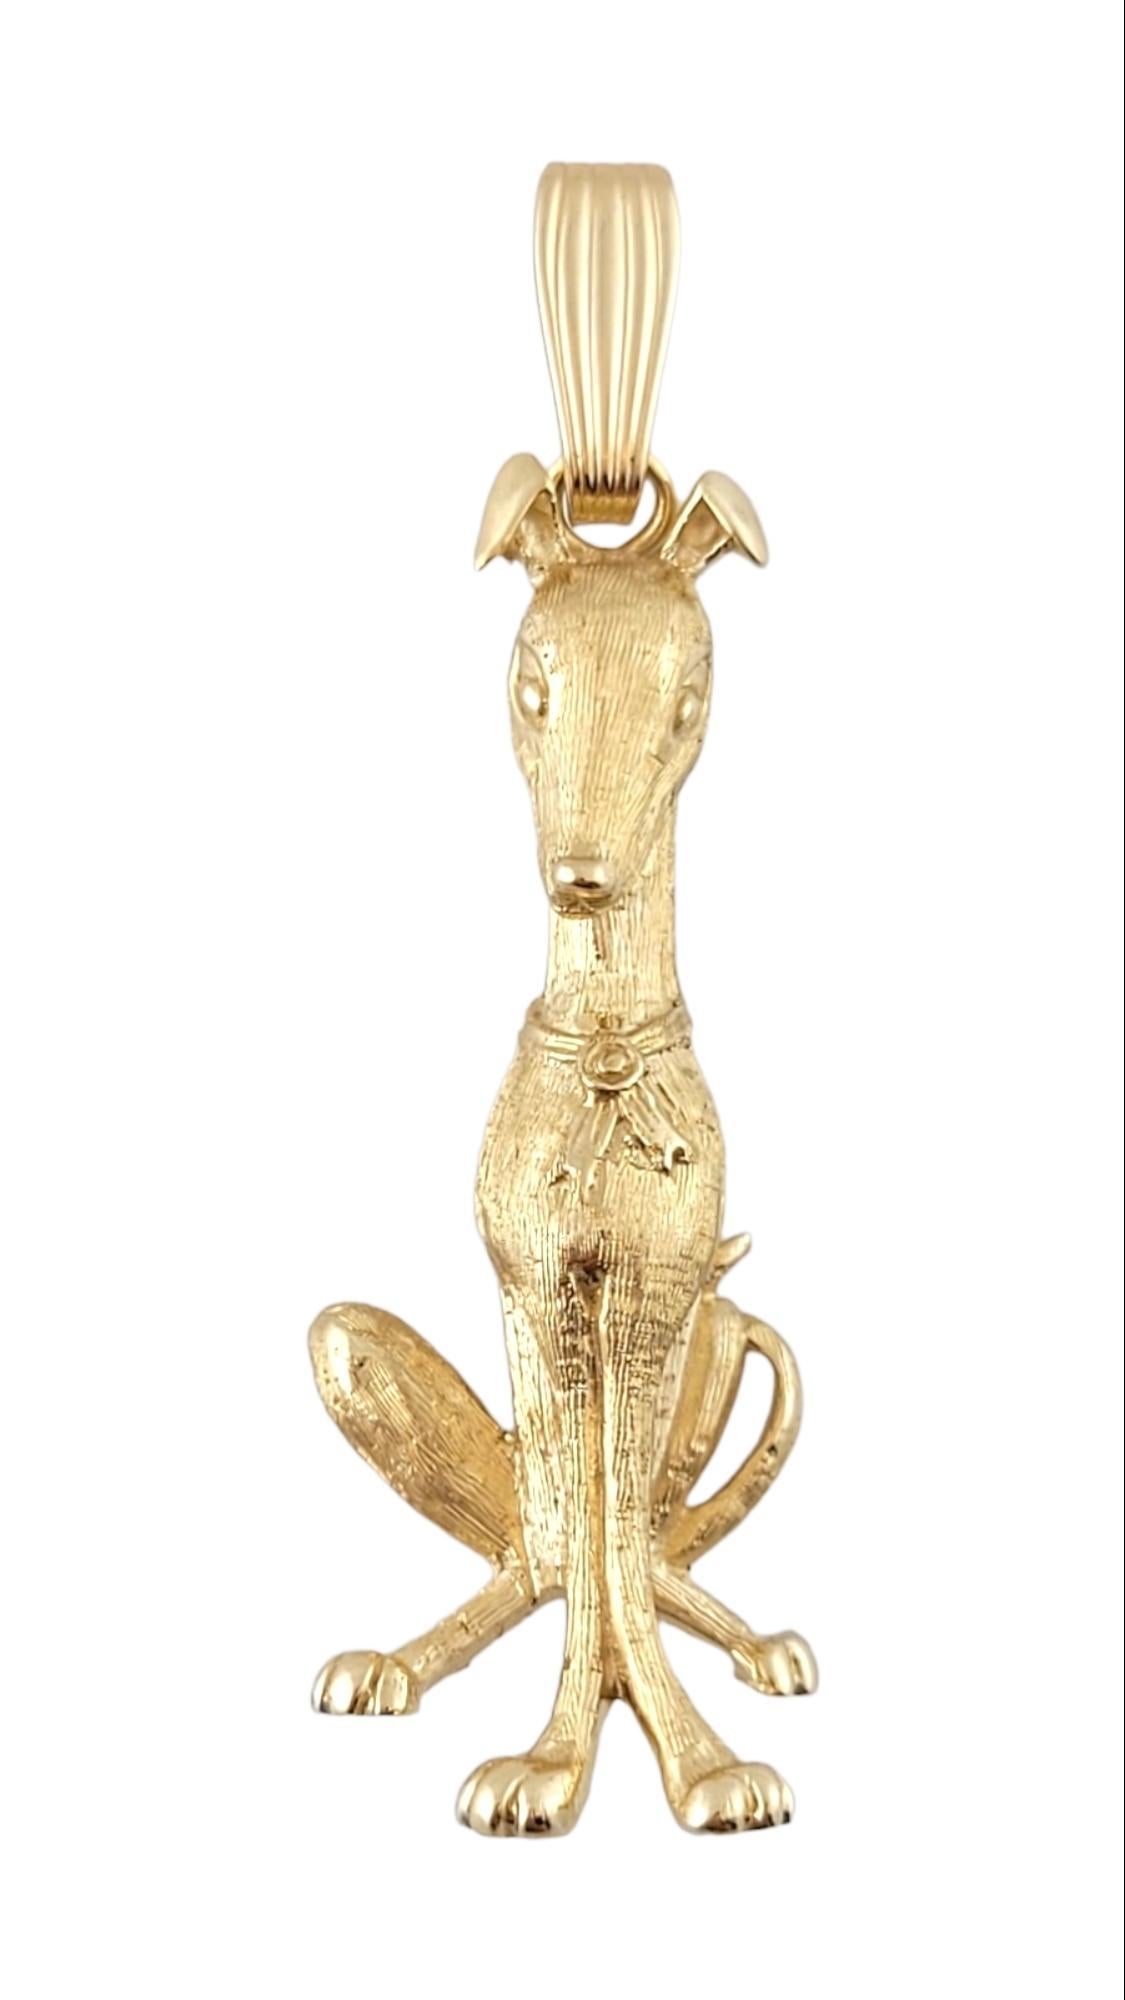  14K Yellow Gold Greyhound Charm

This adorable greyhound charm is crafted from 14K yellow gold and is perfect for any dog lover!

Size: 39.0mm X 14.6mm X 8.5mm

Length w/ bail: 48.5mm

Weight: 8.40 g/ 5.4 dwt

Hallmark: 14K

Very good condition,